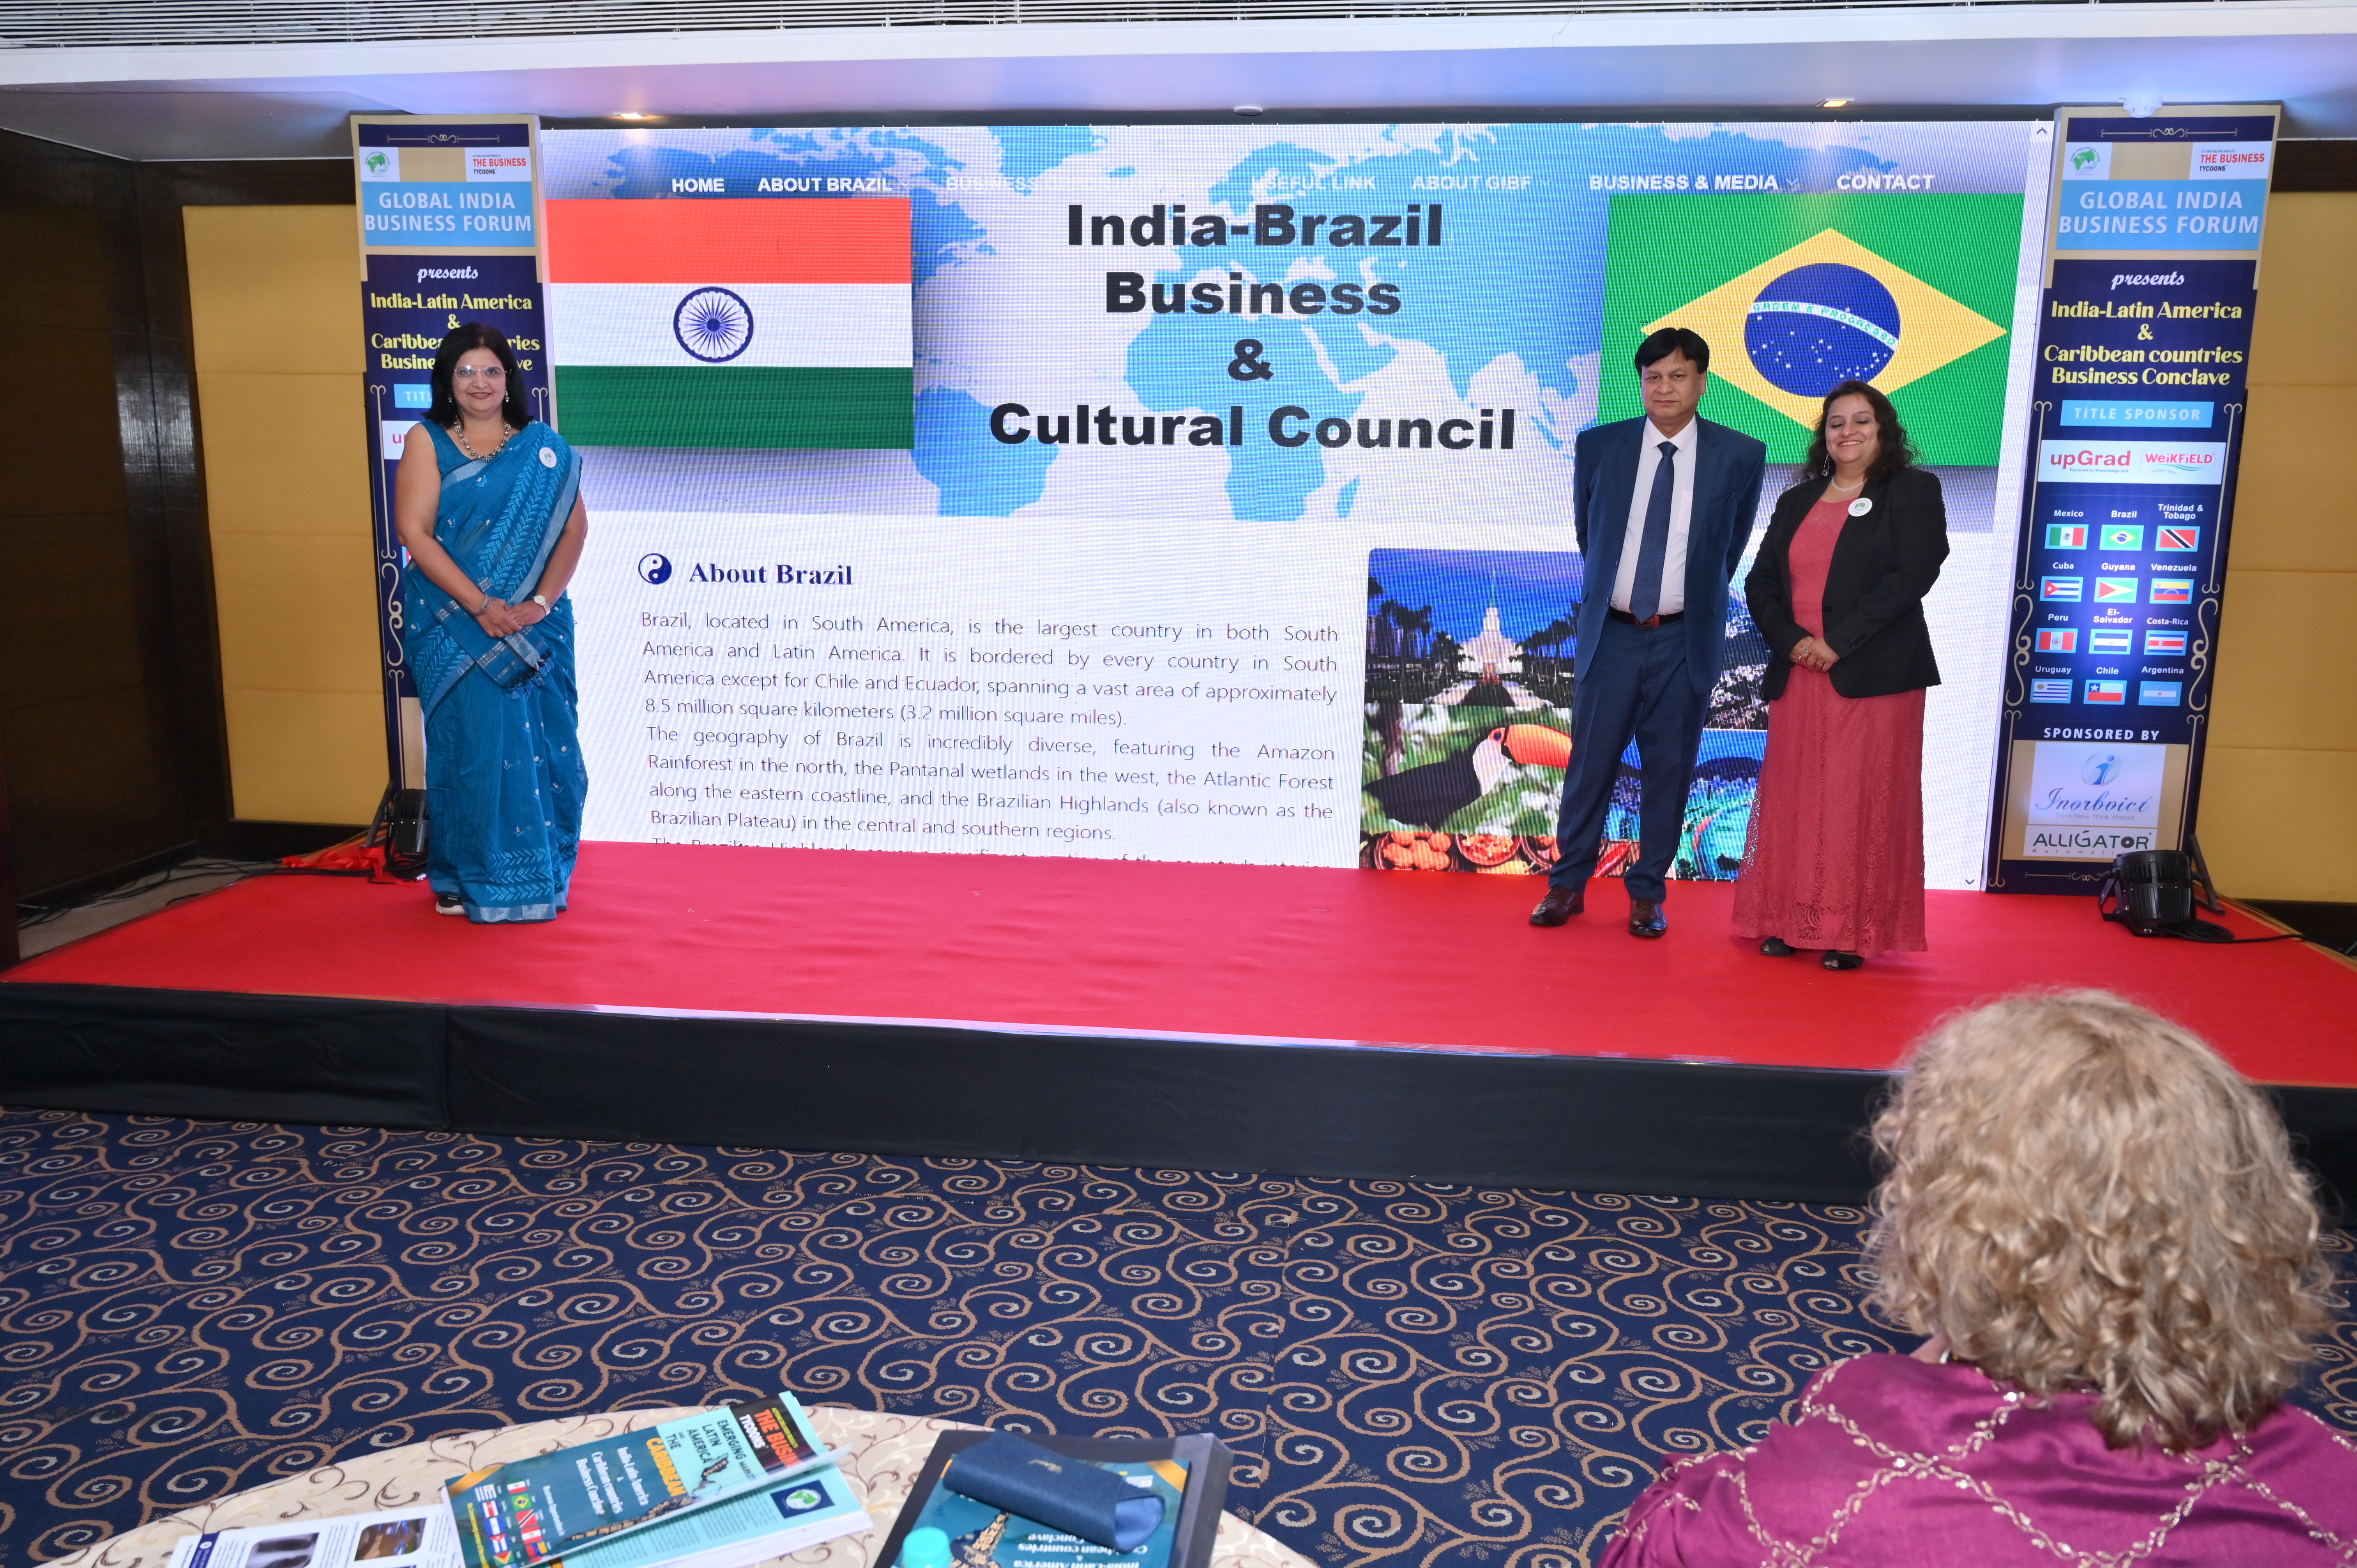 gibf-past-event-india-latin-america-and-caribbean-country-business-conclave-brazil-website-of-india-brazil-business-and-cultural-council-2024